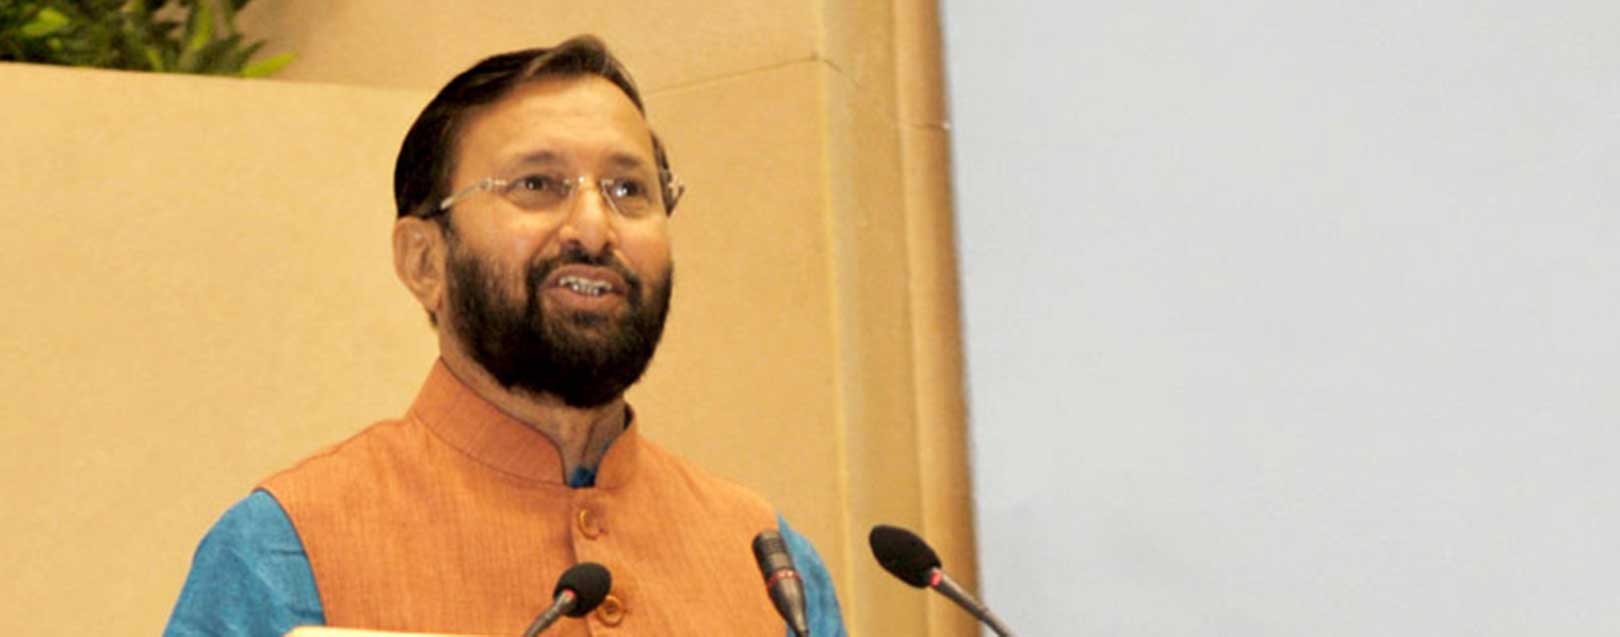 Projects worth 10 lakh crore cleared by Env Min: Javadekar